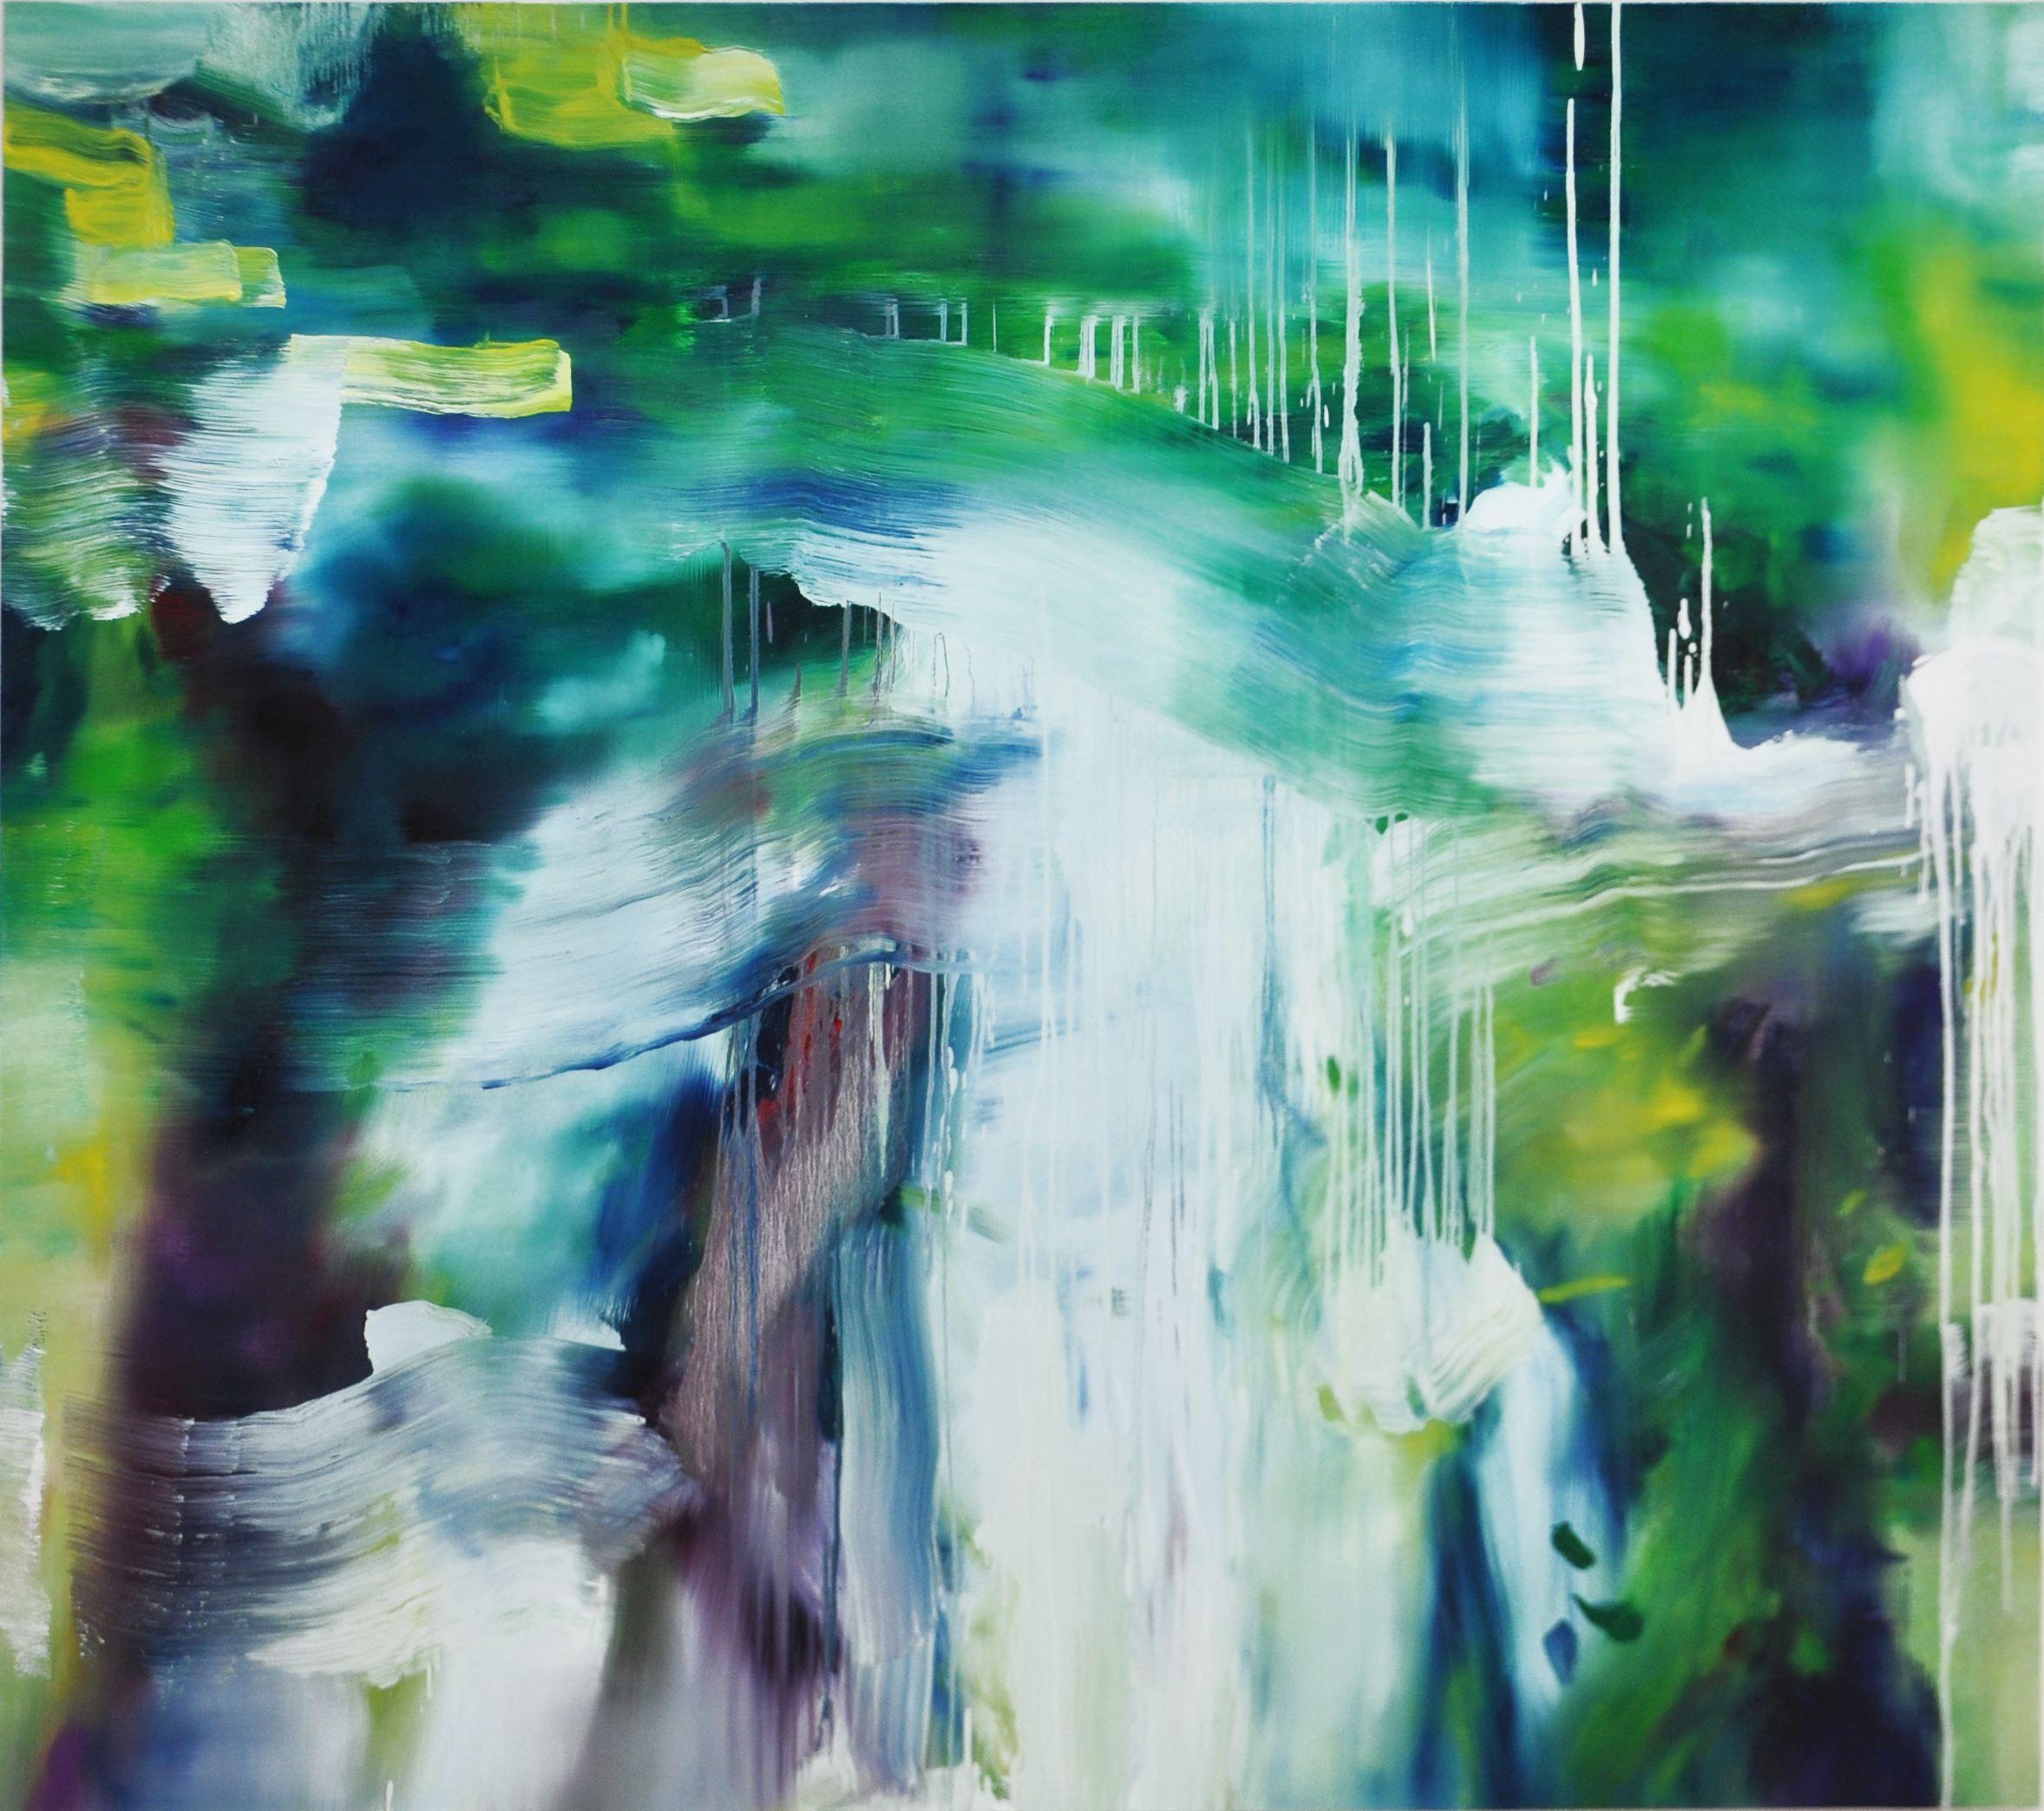 Angelina Nasso's painting "Receive" is an oil on canvas from 2014 inspired by the lush forest setting of upstate New York. The painting focuses on an abstracted, gestural landscape, using bold and verdant colors that transform the space into a